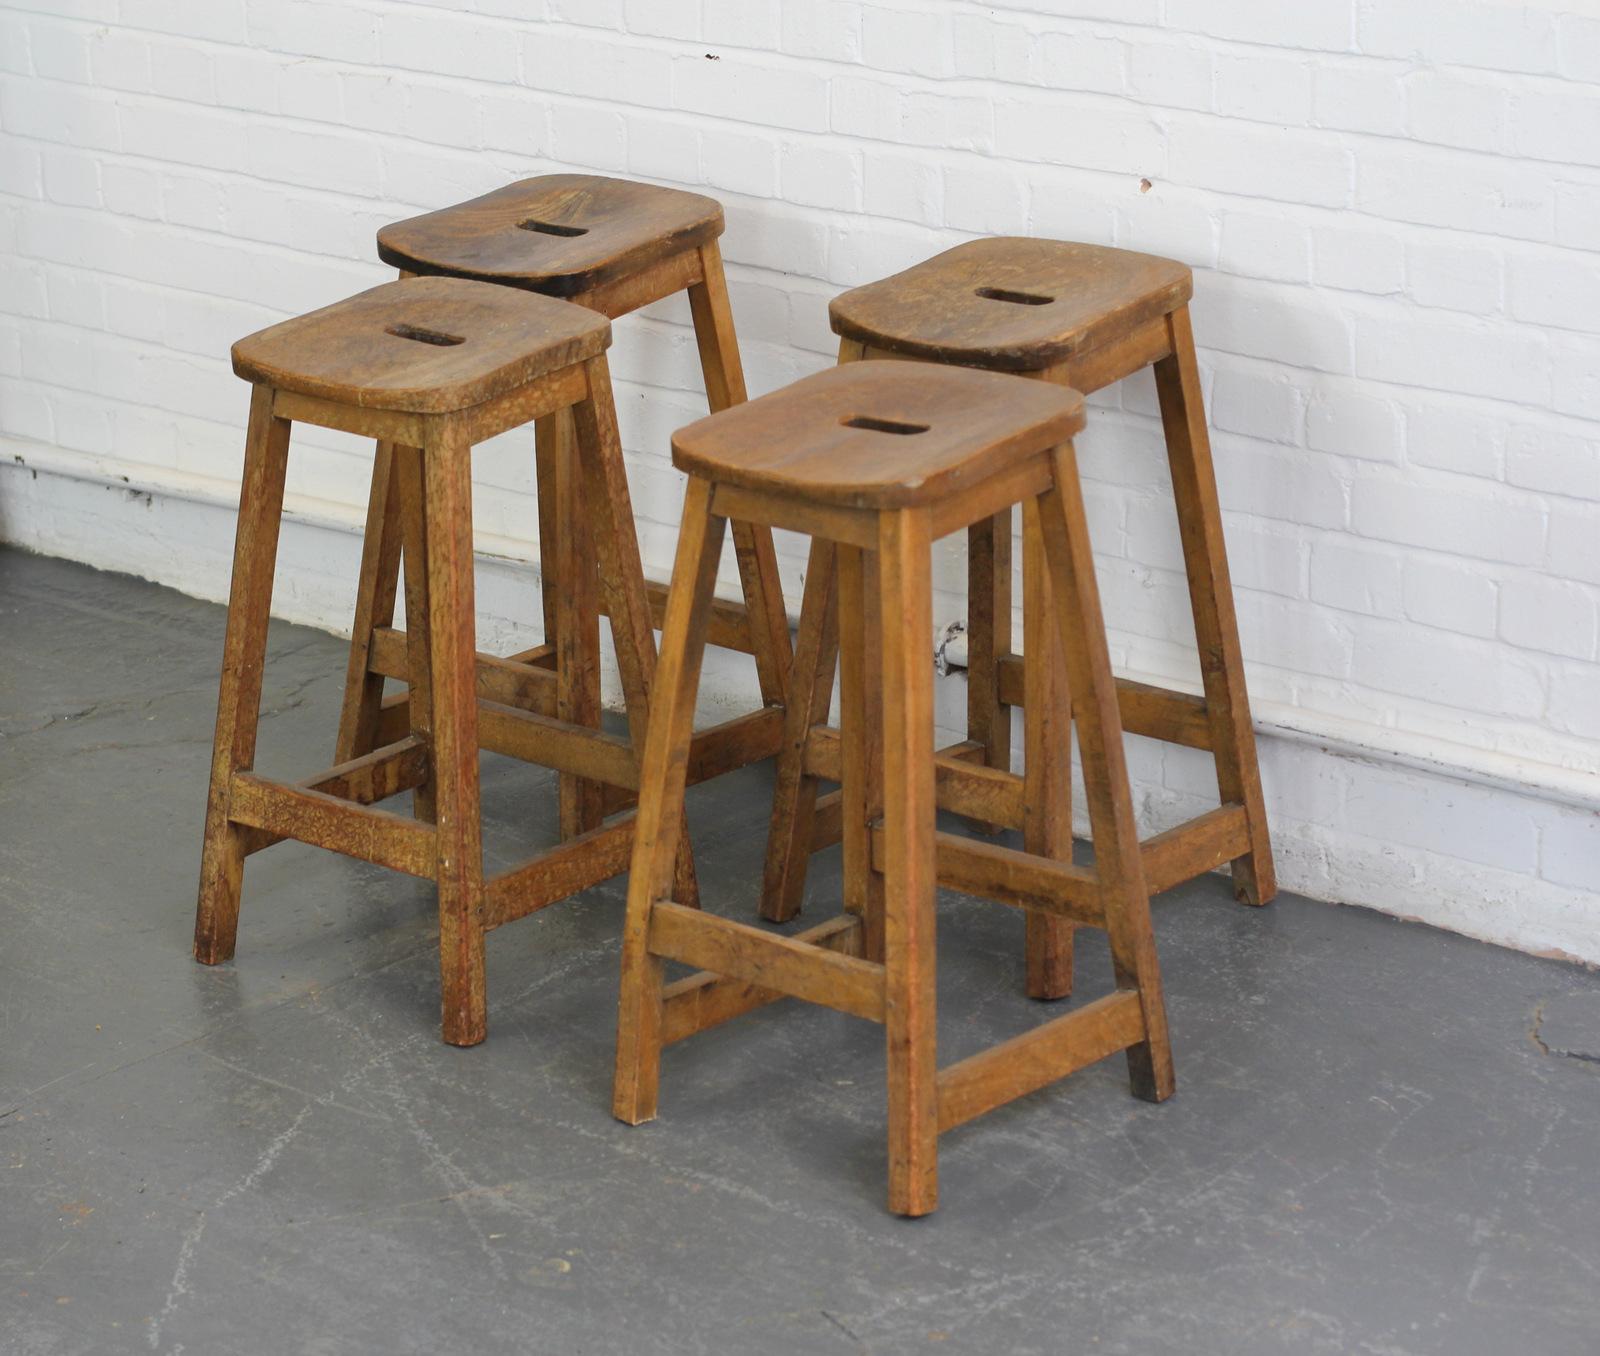 Elm Machinists stools, circa 1950s

- Price is per stool (4 available)
- Solid elm frames
- Solid elm seats with cut-out handle 
- The seats have a tilt design 
- Stamped by the Maker
- Salvaged from the engineering dept of Birmingham